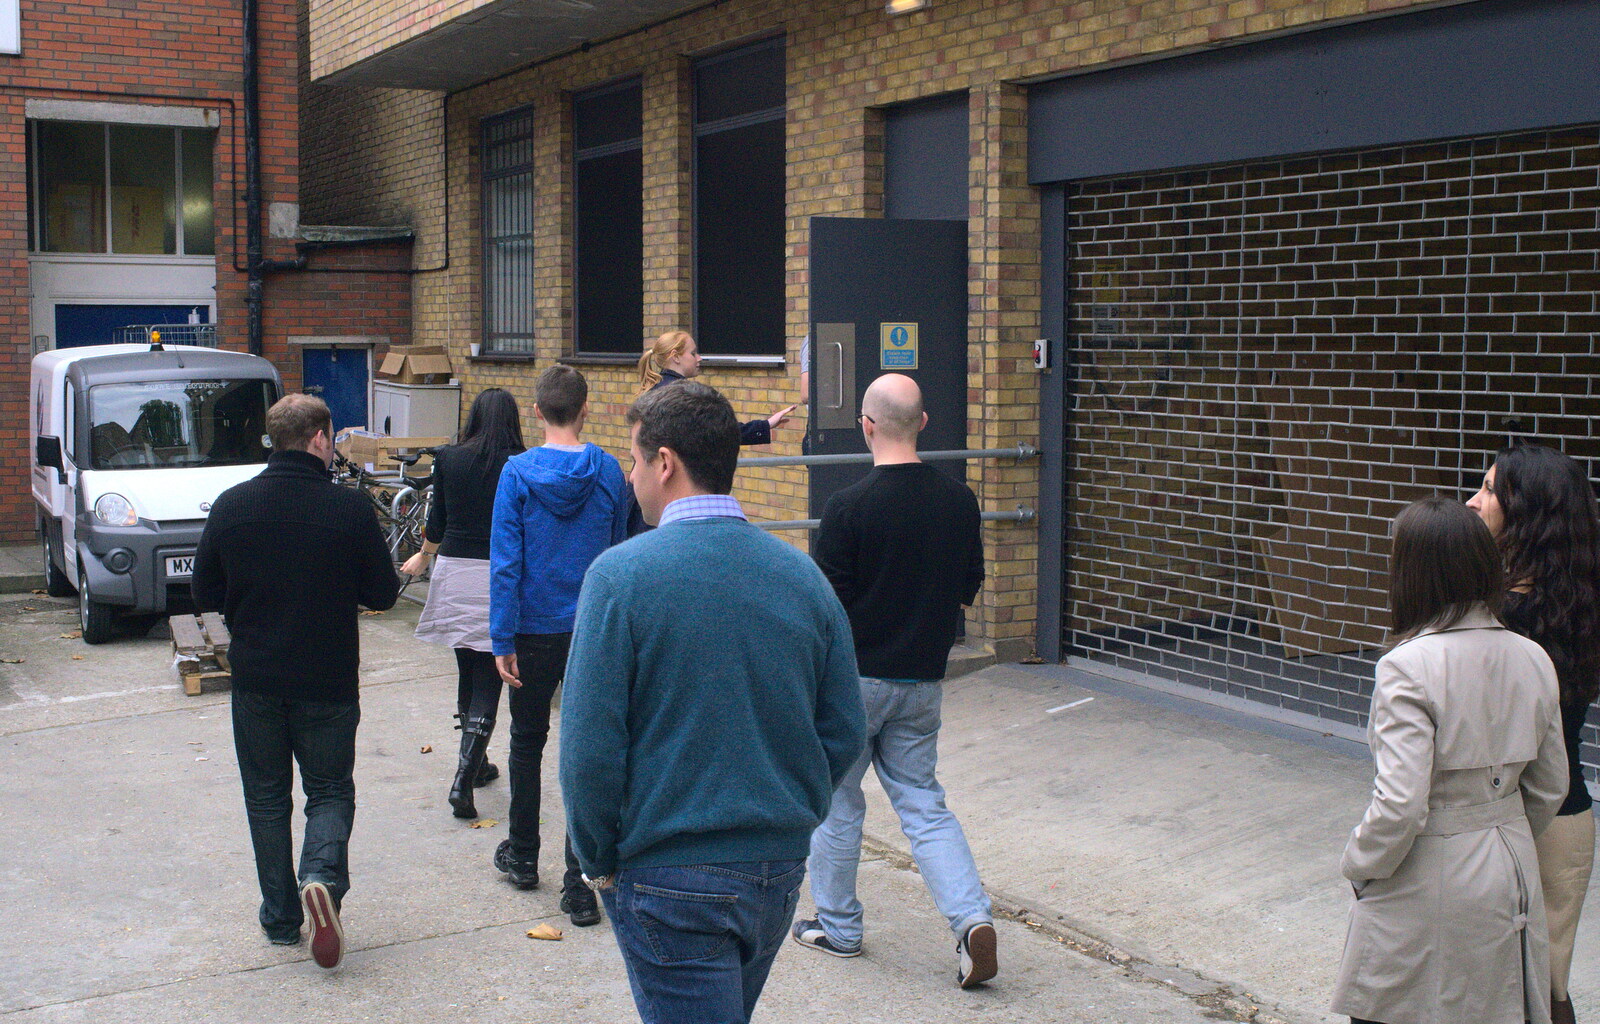 We head back via the salubrious back entrance from A TouchType Office Fire Drill, Southwark Bridge Road, London - 6th October 2012